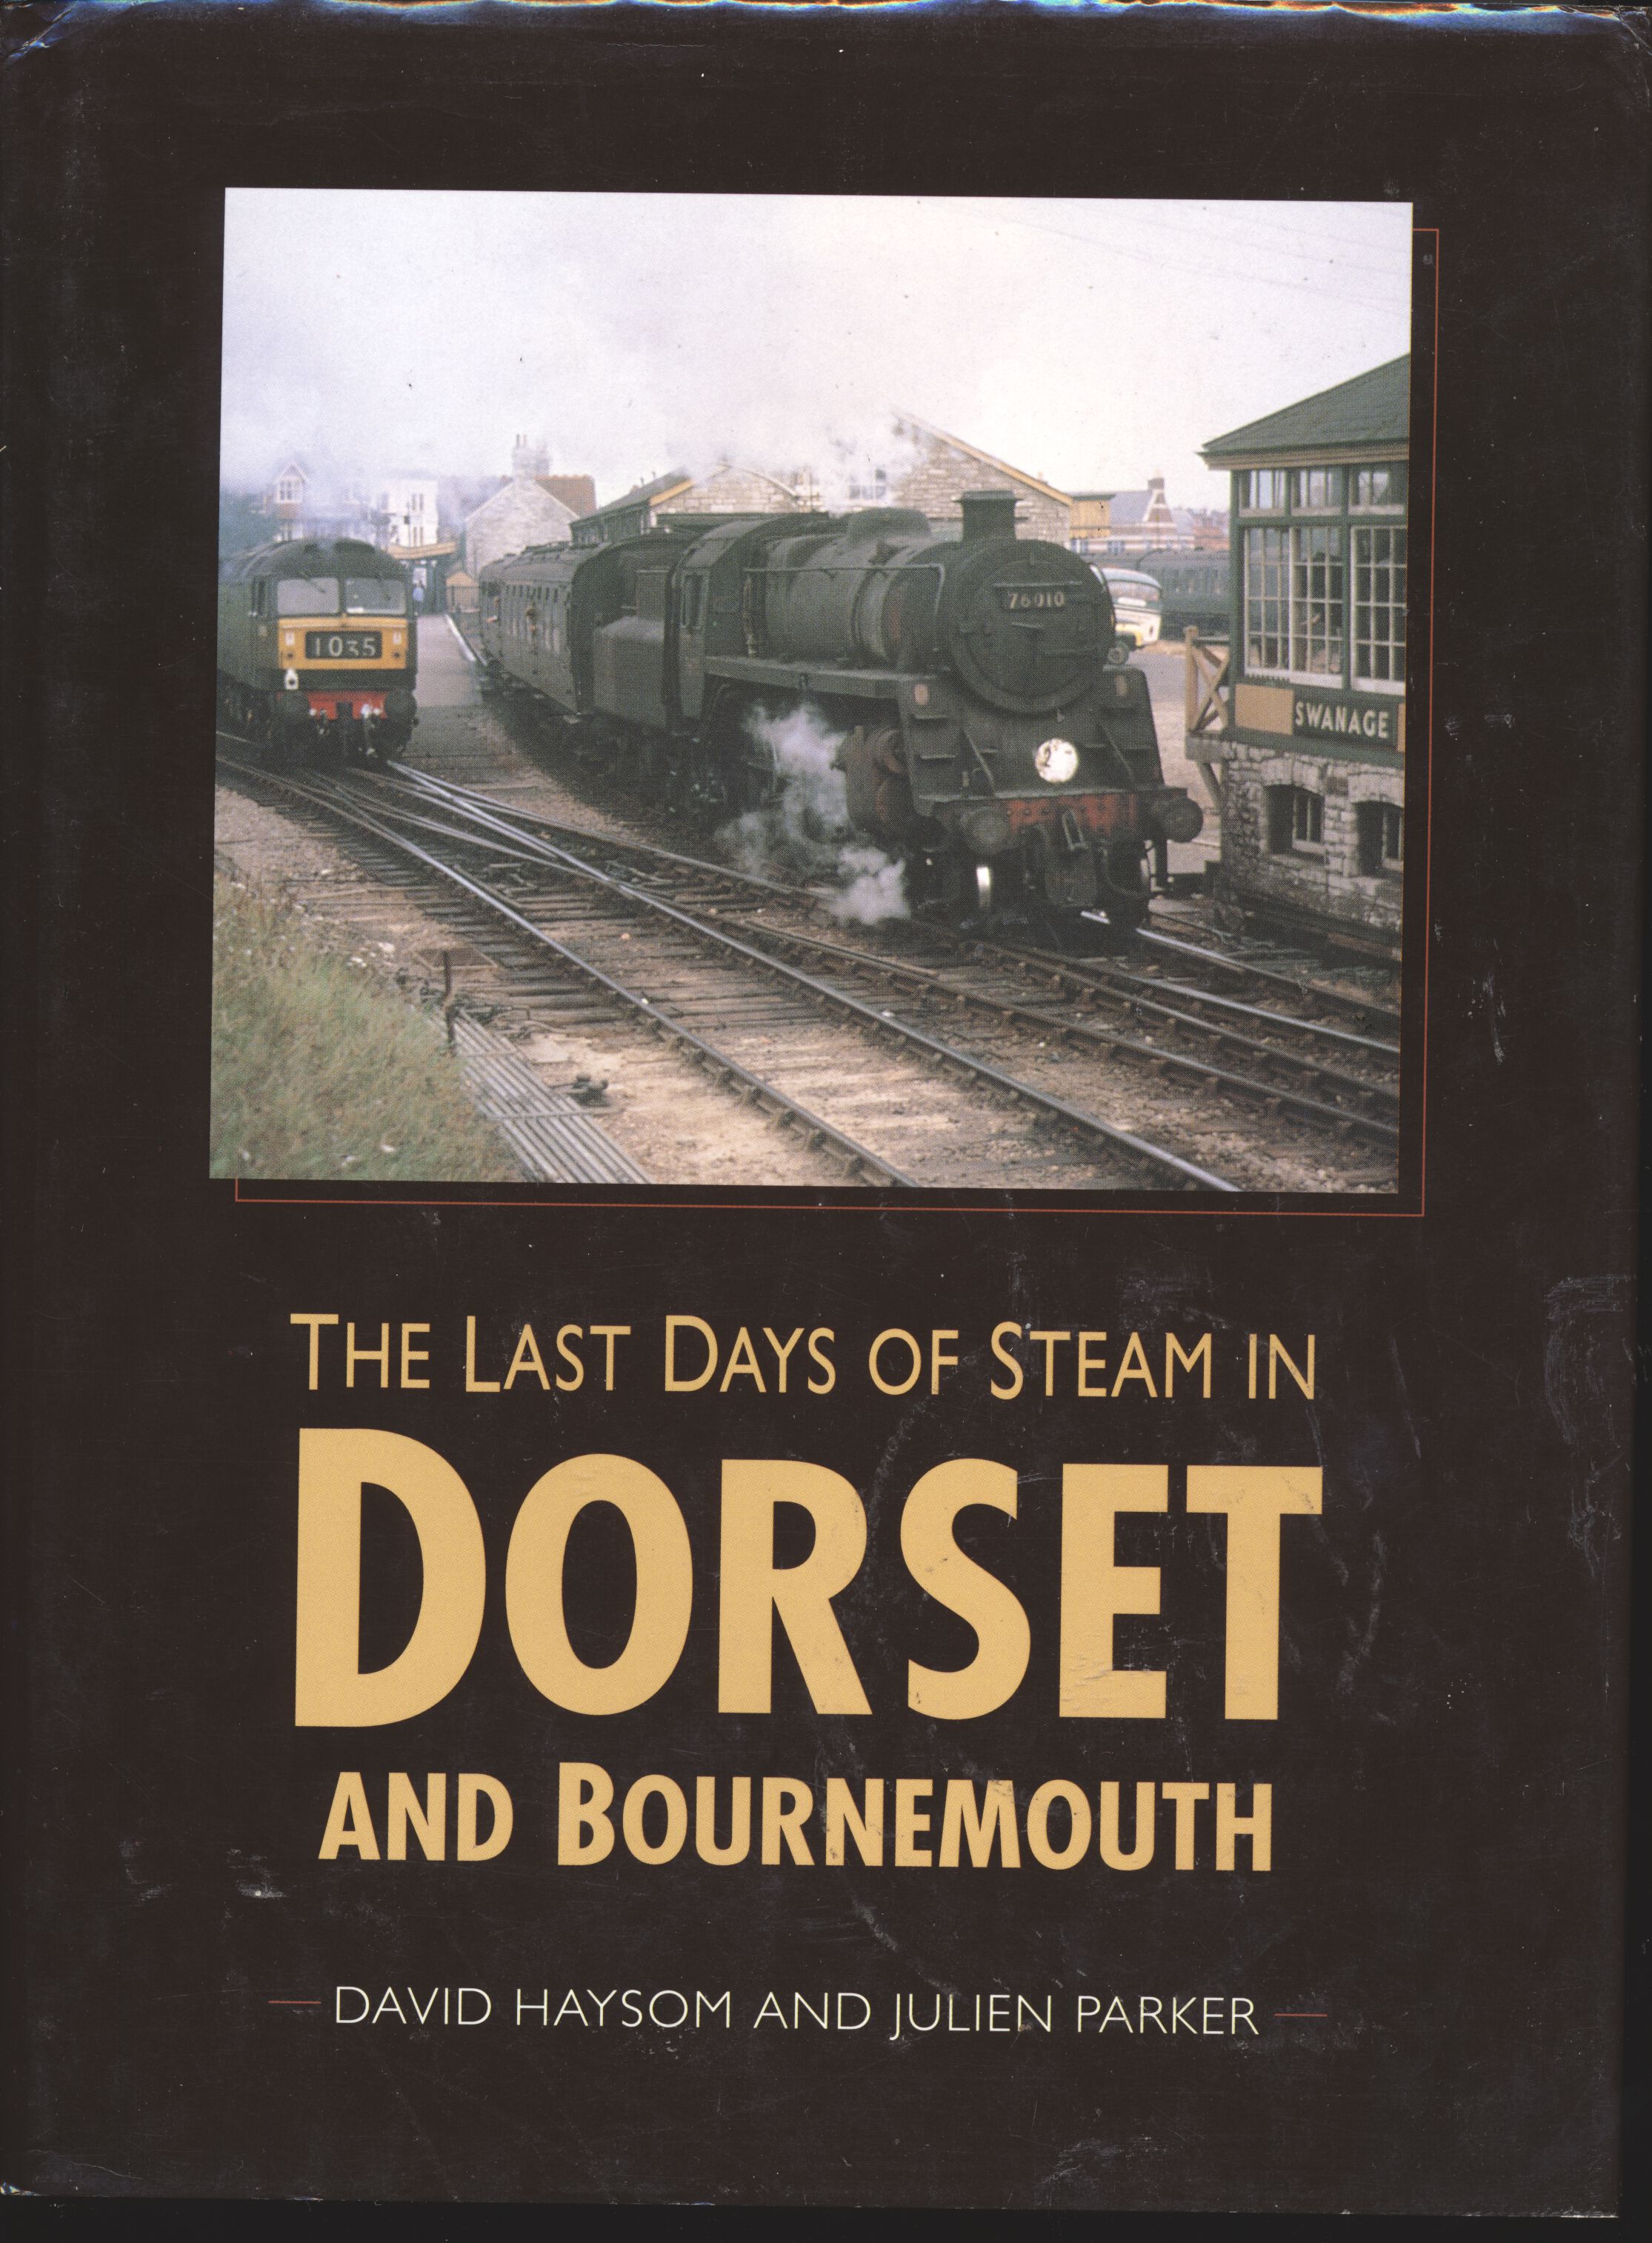 The Last Days of Steam in Dorset and Bournemouth - David Haysom and Julien Parker